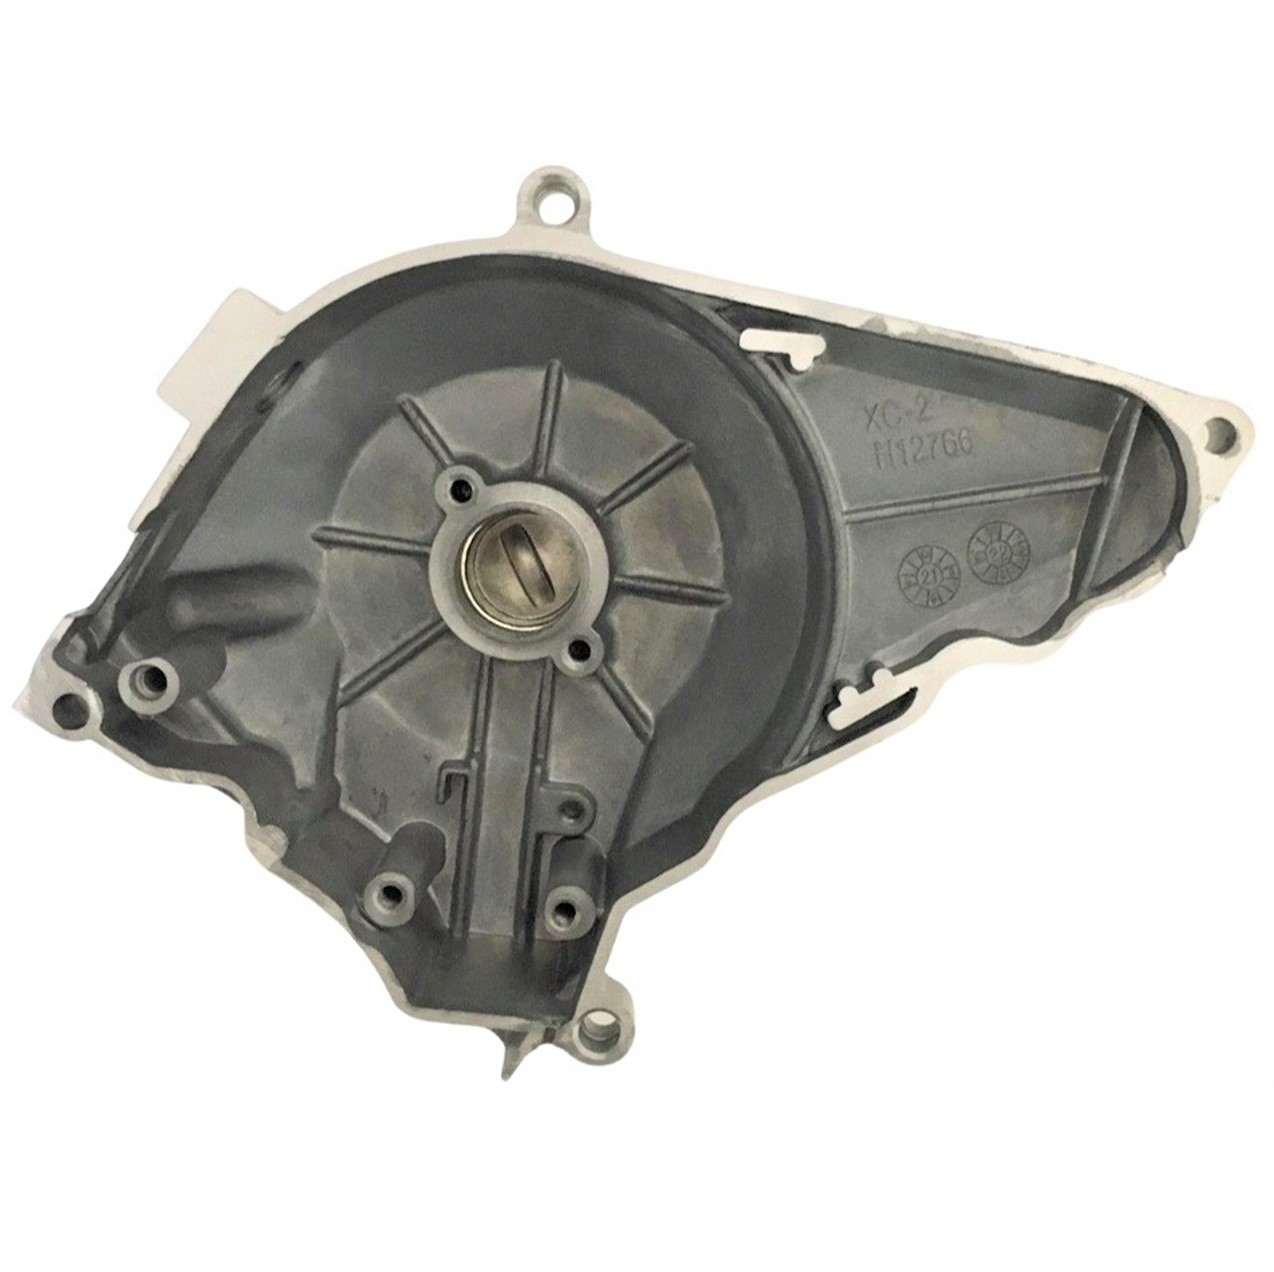 Stator Cover Fits 50-125cc Honda Copy ATV & DirtBikes with the bottom mount starter.